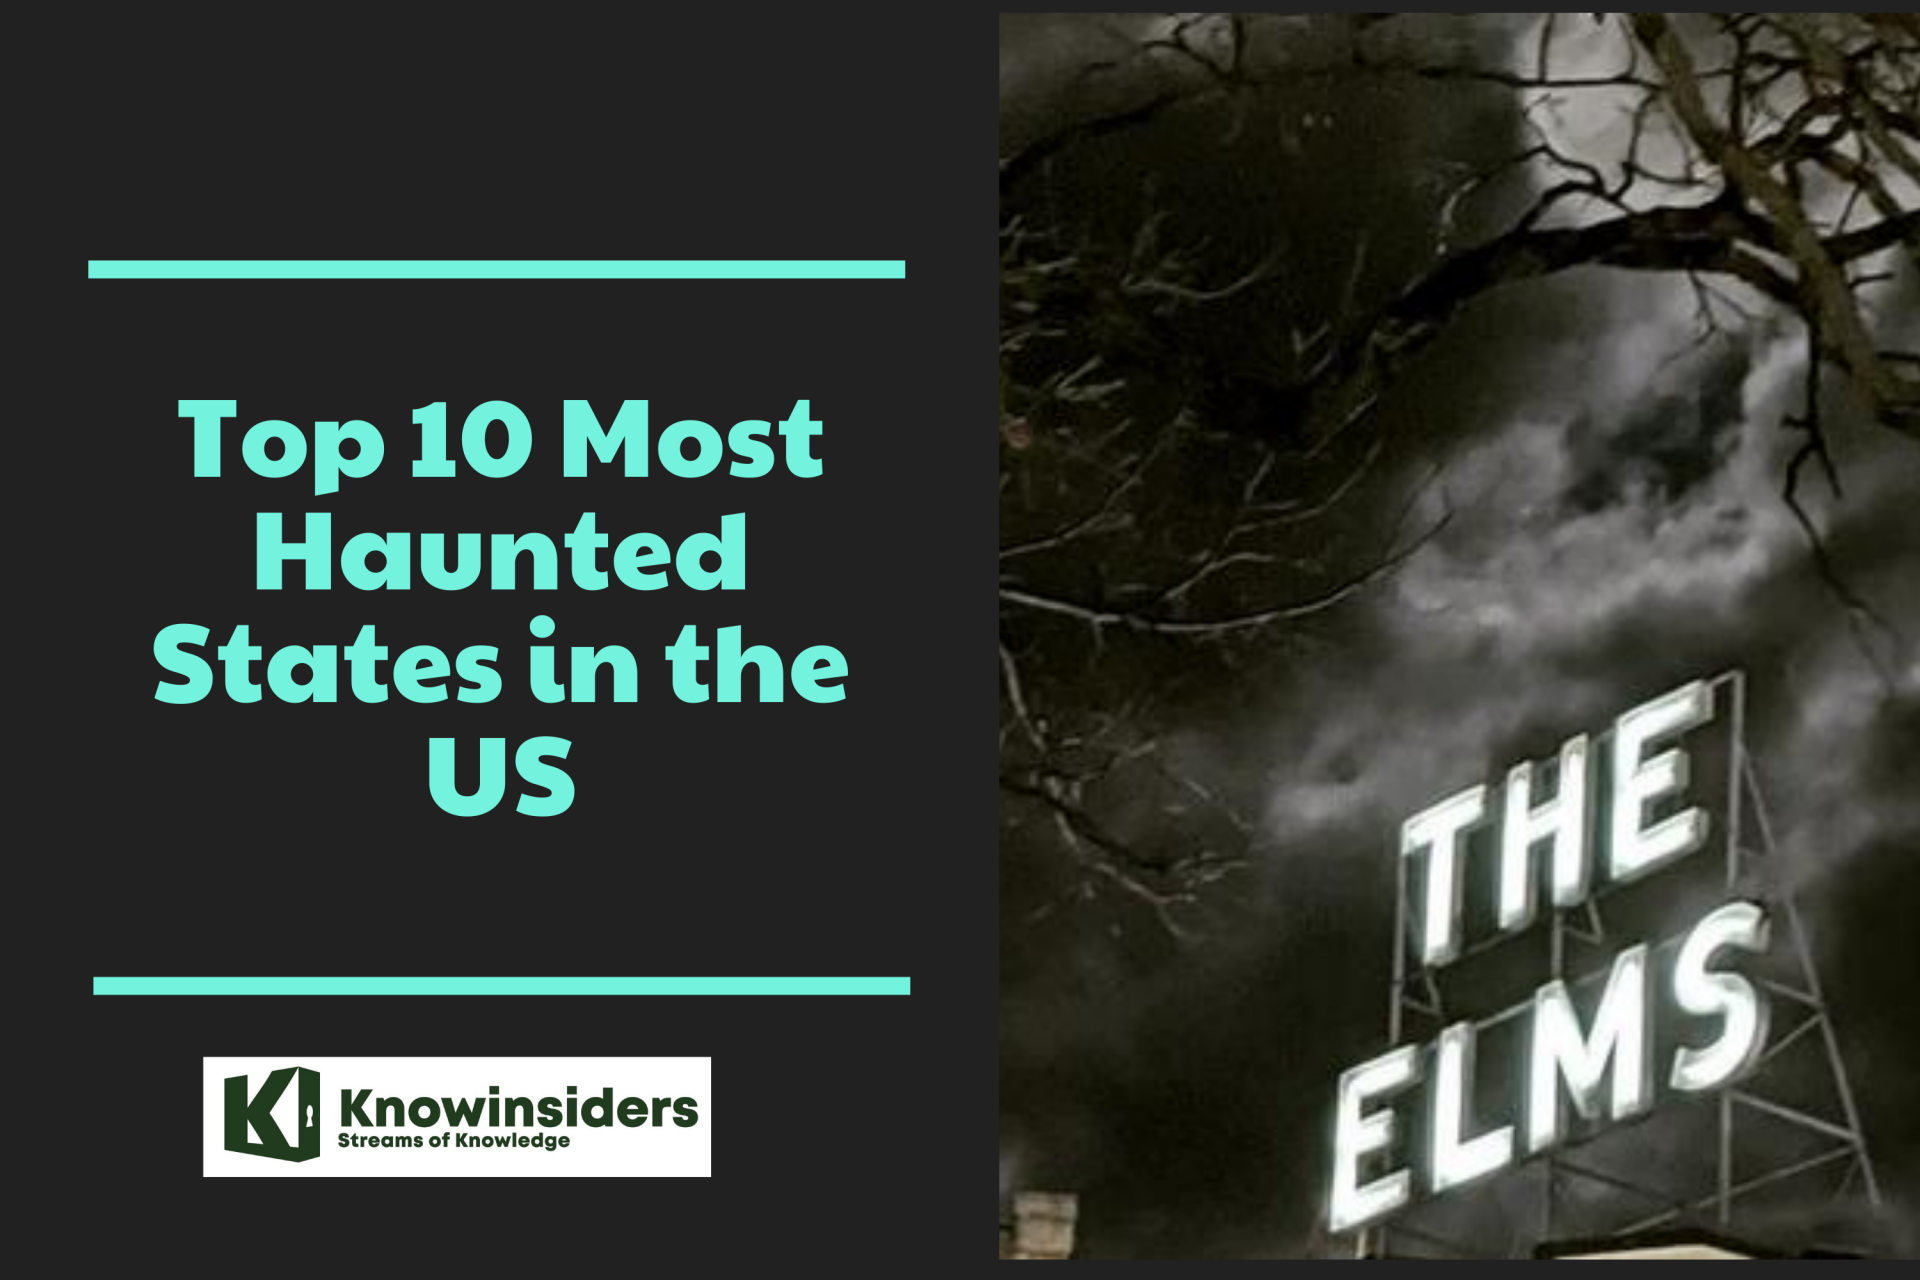 Top 10 Most Haunted and Ghost States in the US